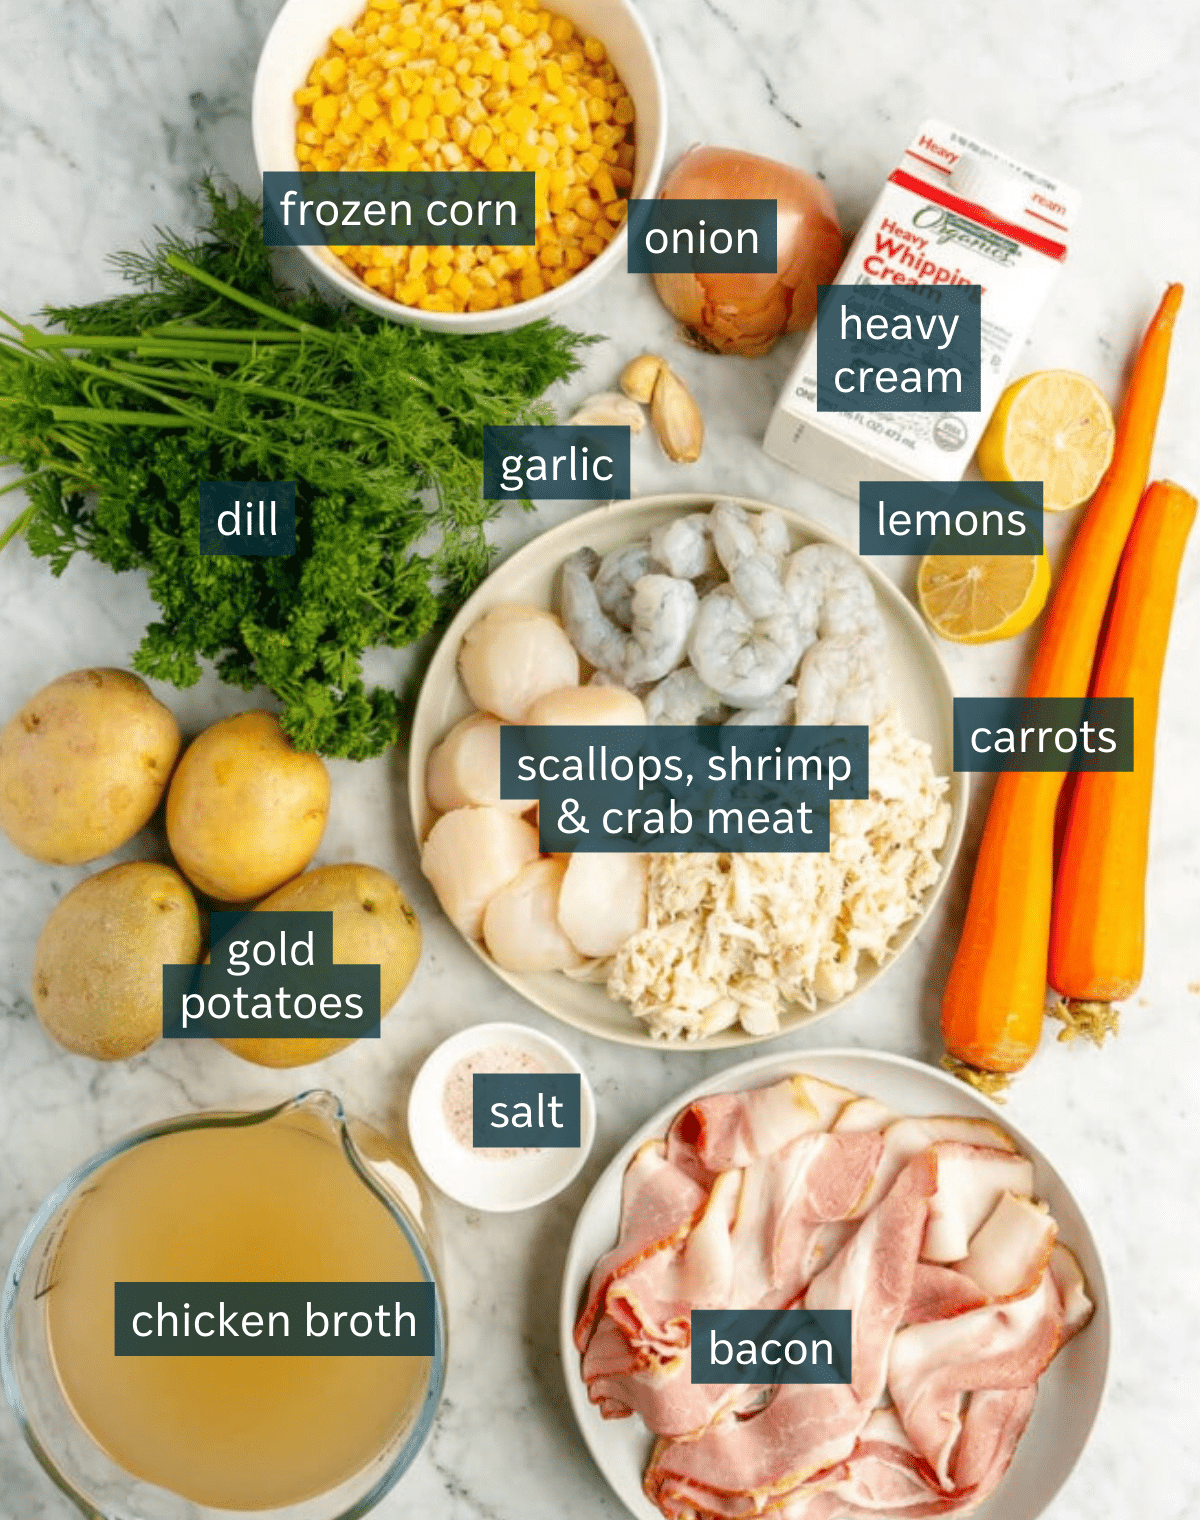 Ingredients for creamy seafood chowder sit in a variety of bowls on a marble countertop.